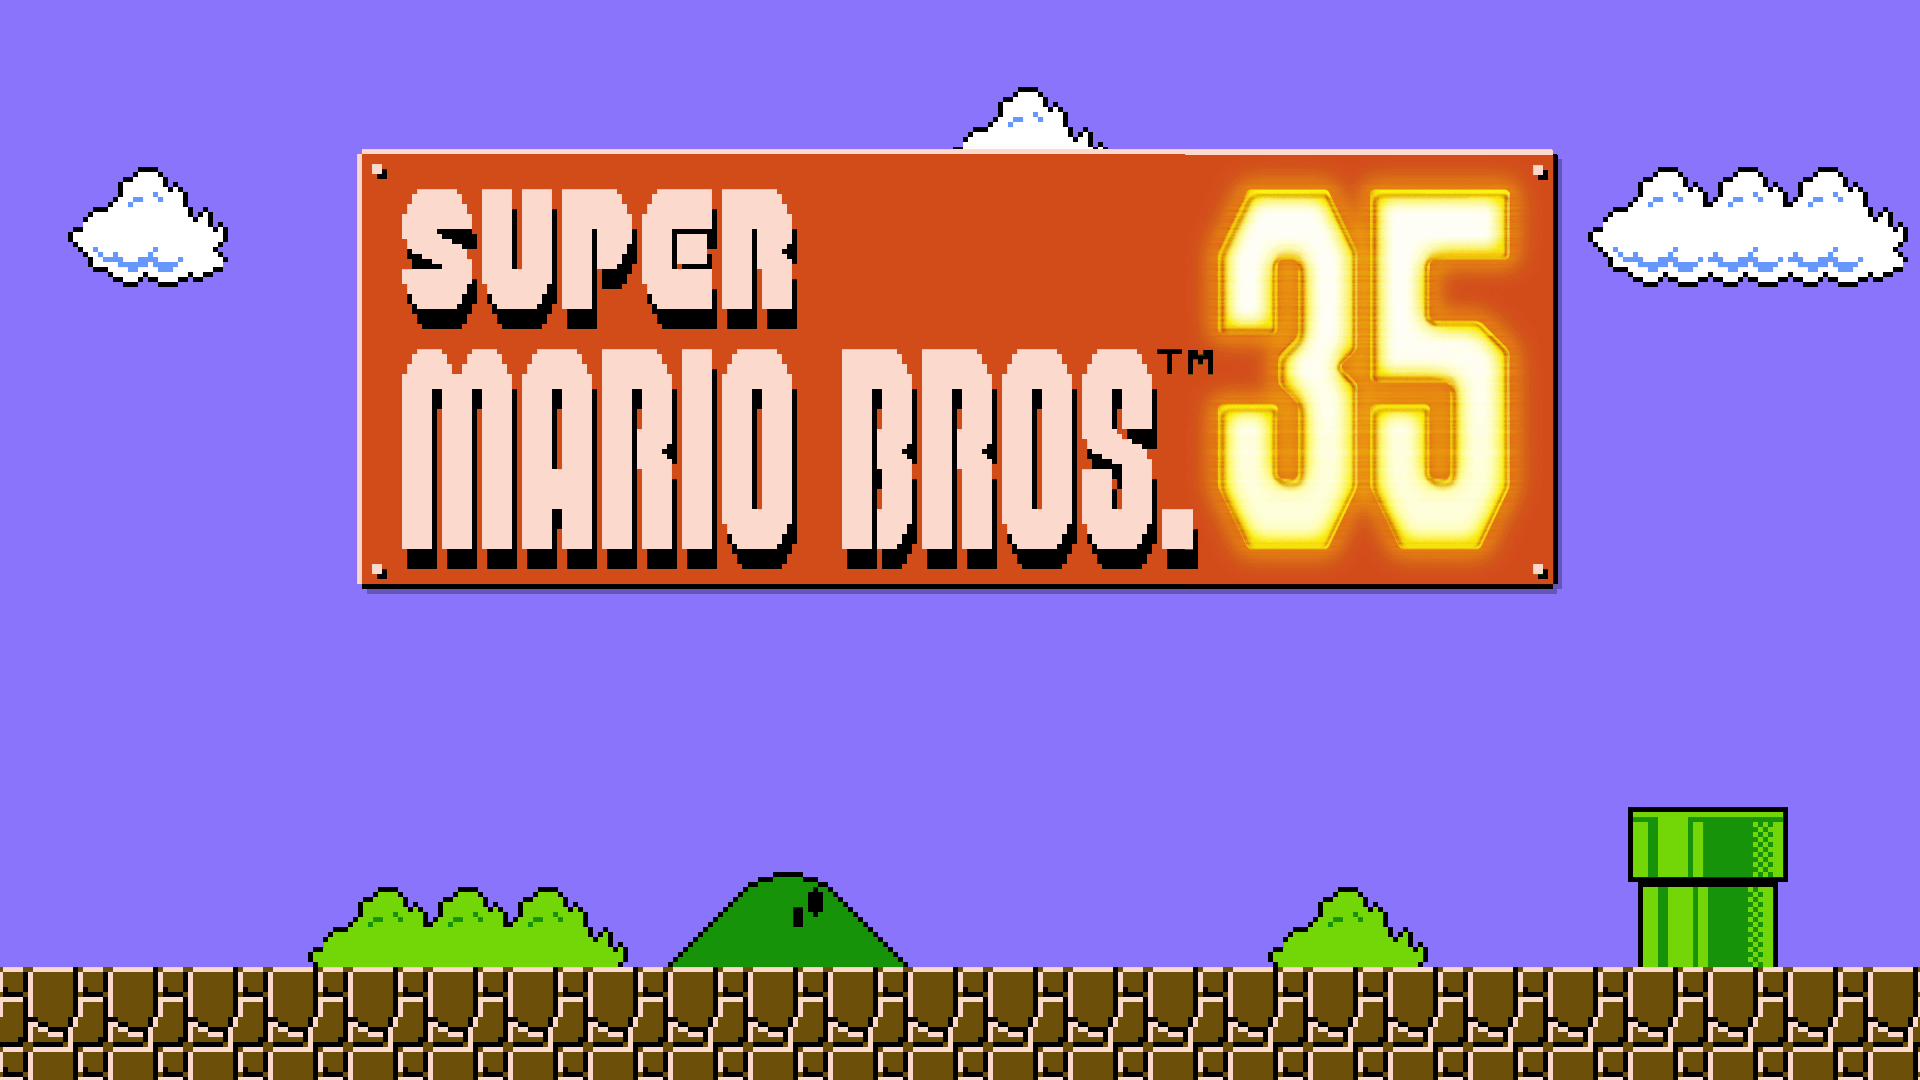 Super Mario Bros 35 available for free on Nintendo Switch